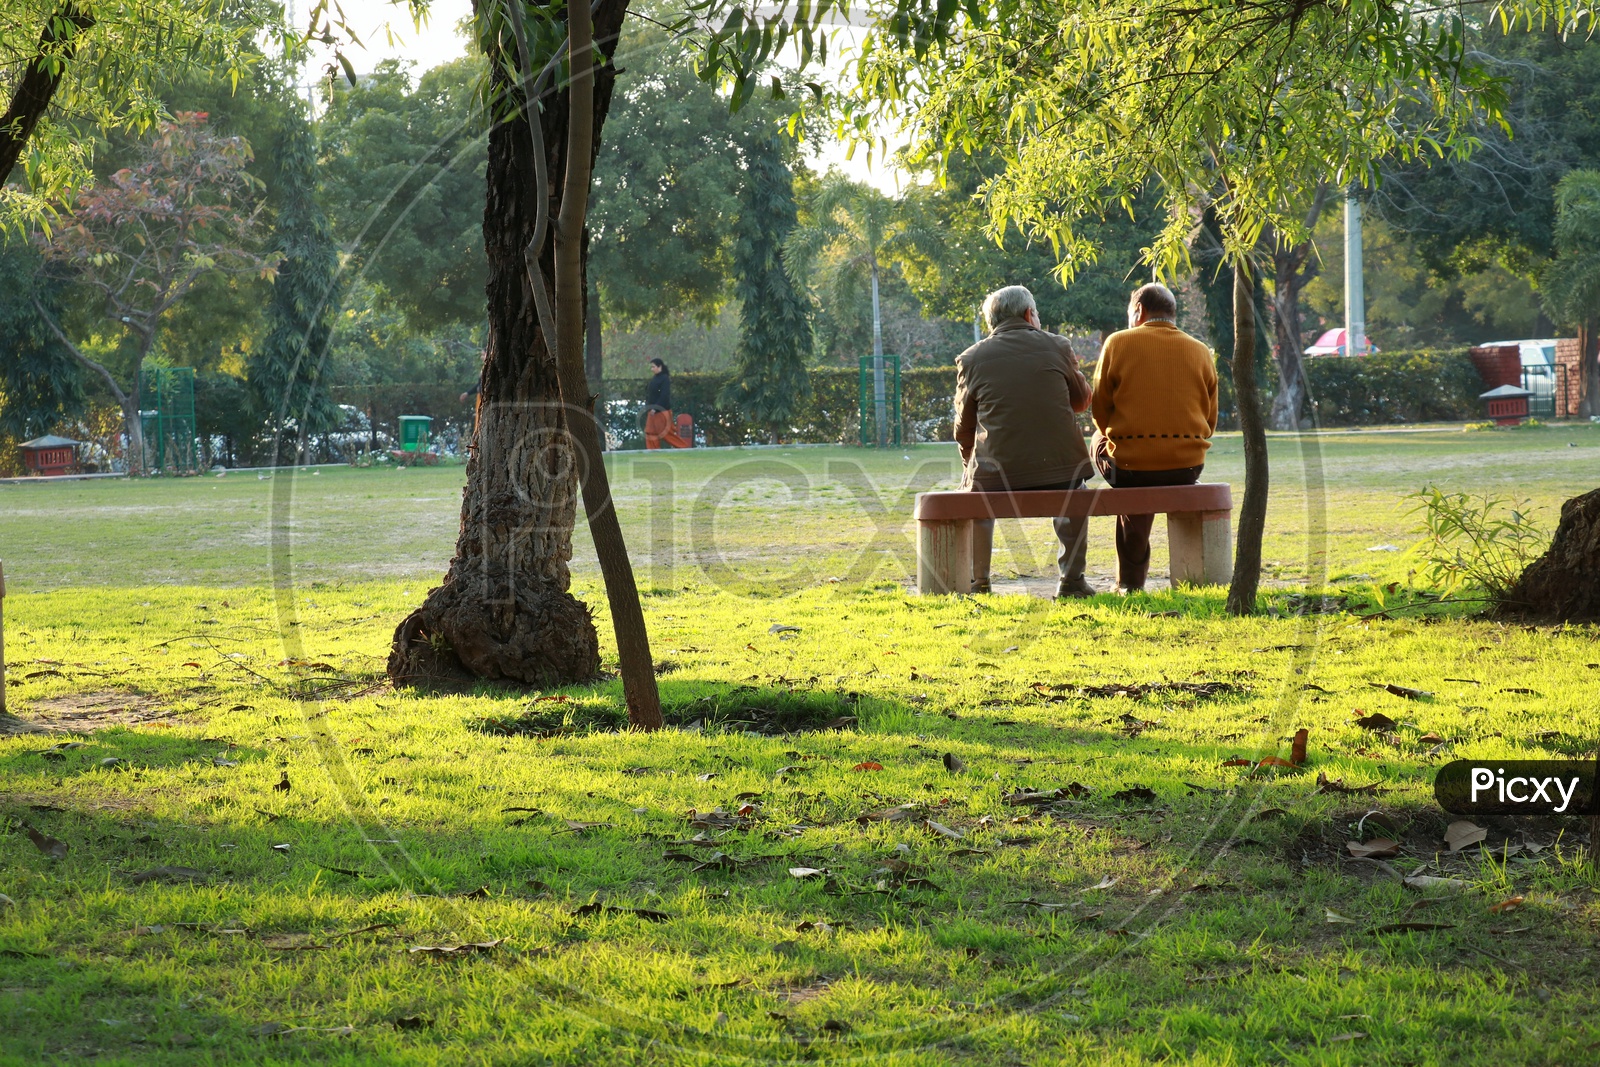 Two Old men sitting on a bench in town park